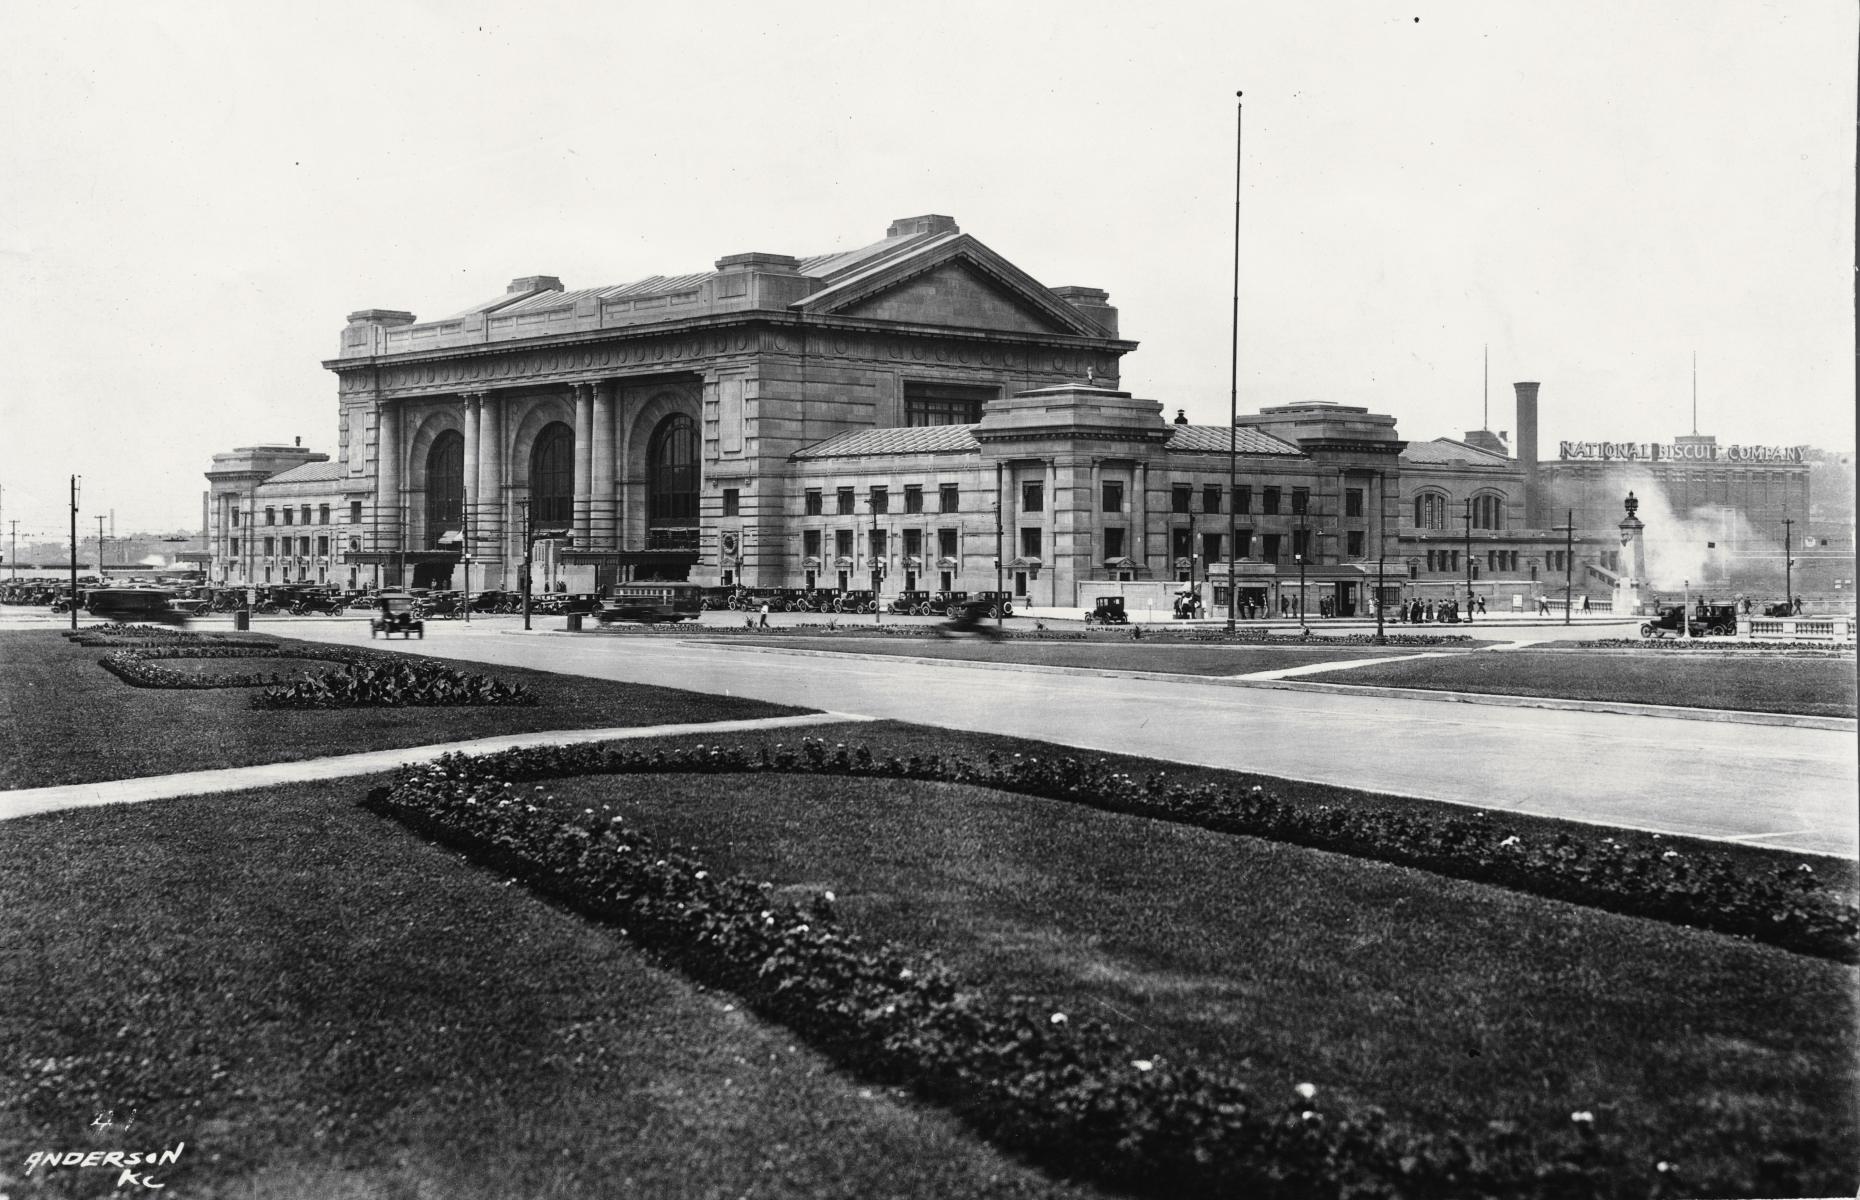 <p>After a devastating flood destroyed the original Kansas City railway station in 1903, it was decided that a new one needed to be built on higher ground. Designed in the Beaux-Arts architectural style that swept the United States and France during the late 19th and early 20th centuries, the new Union Station – pictured here near the beginning of its long life – opened in 1914. The first train to roll onto its platform was the Missouri-Kansas-Texas Flyer, later known simply as 'the Katy.'</p>